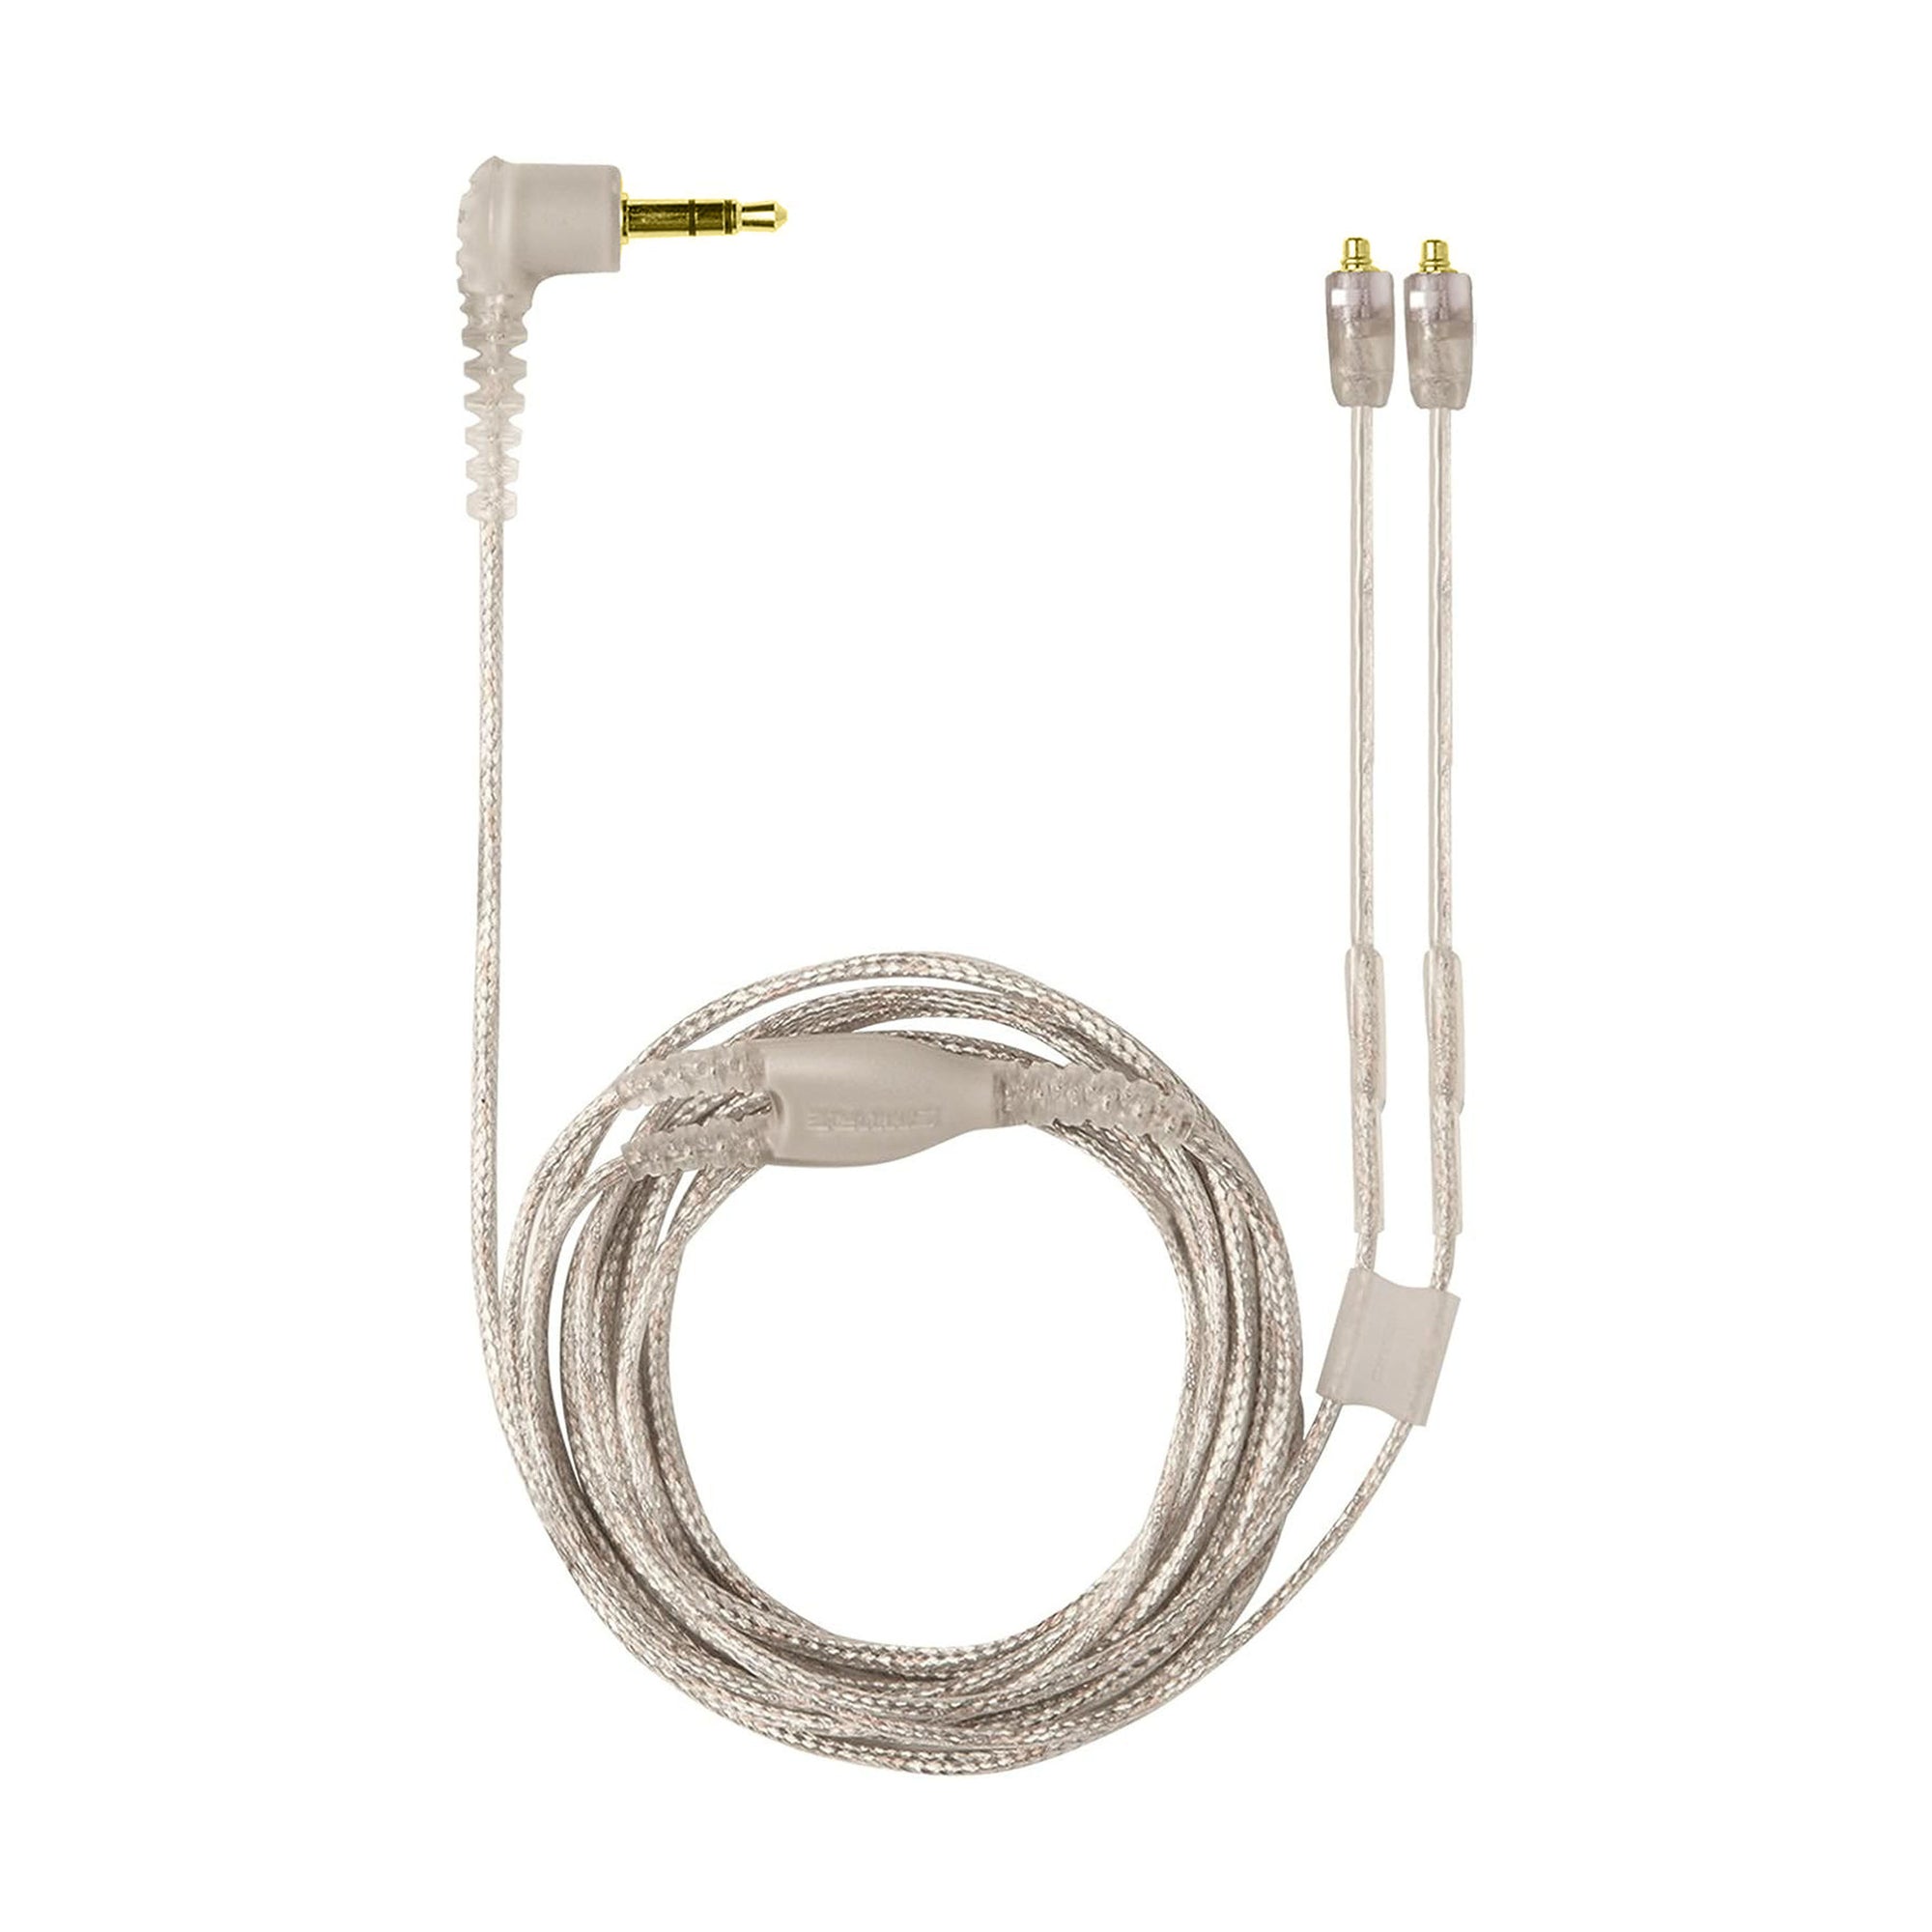 Replacement Cable for Shure SE215, SE315, SE425, SE535 & SE846 Earphones, Silver Clear Wire, 3.5mm With MMCX Connectors - 1.25M / 48”